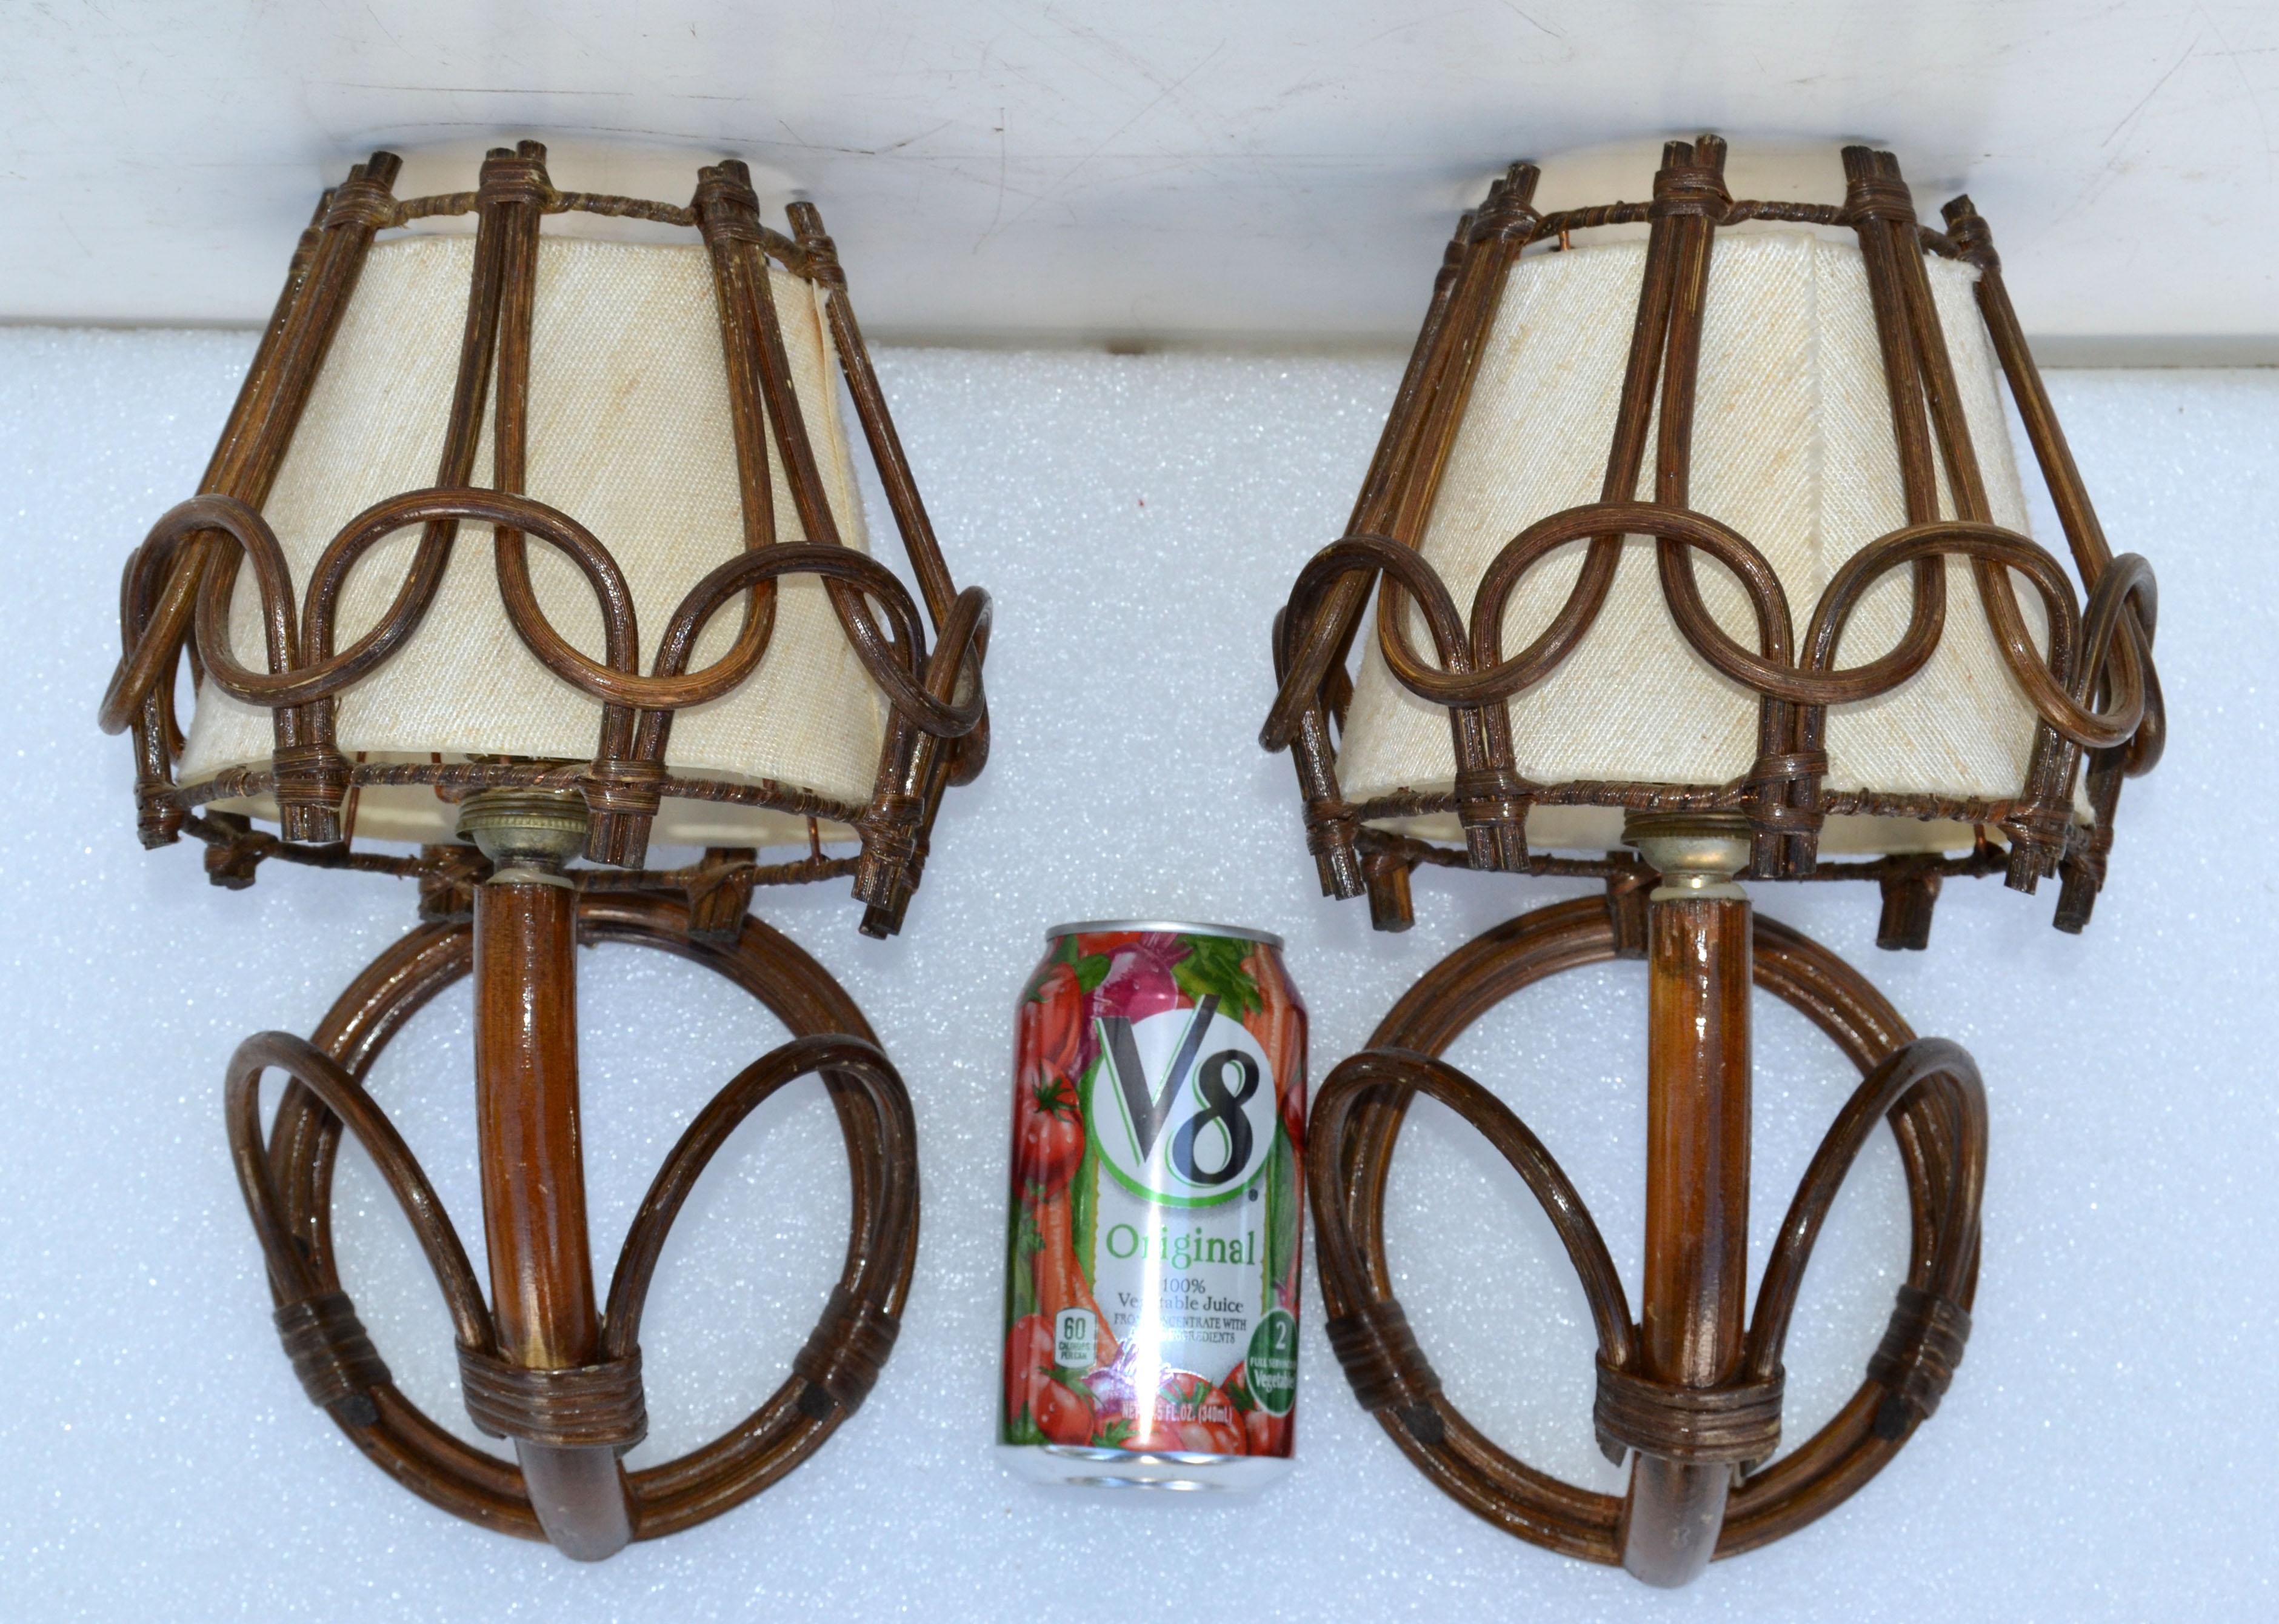 Hand-Woven Organic Bend Bamboo Sconce Woven Bamboo Cased Fiber Shades France 1950, Pair For Sale